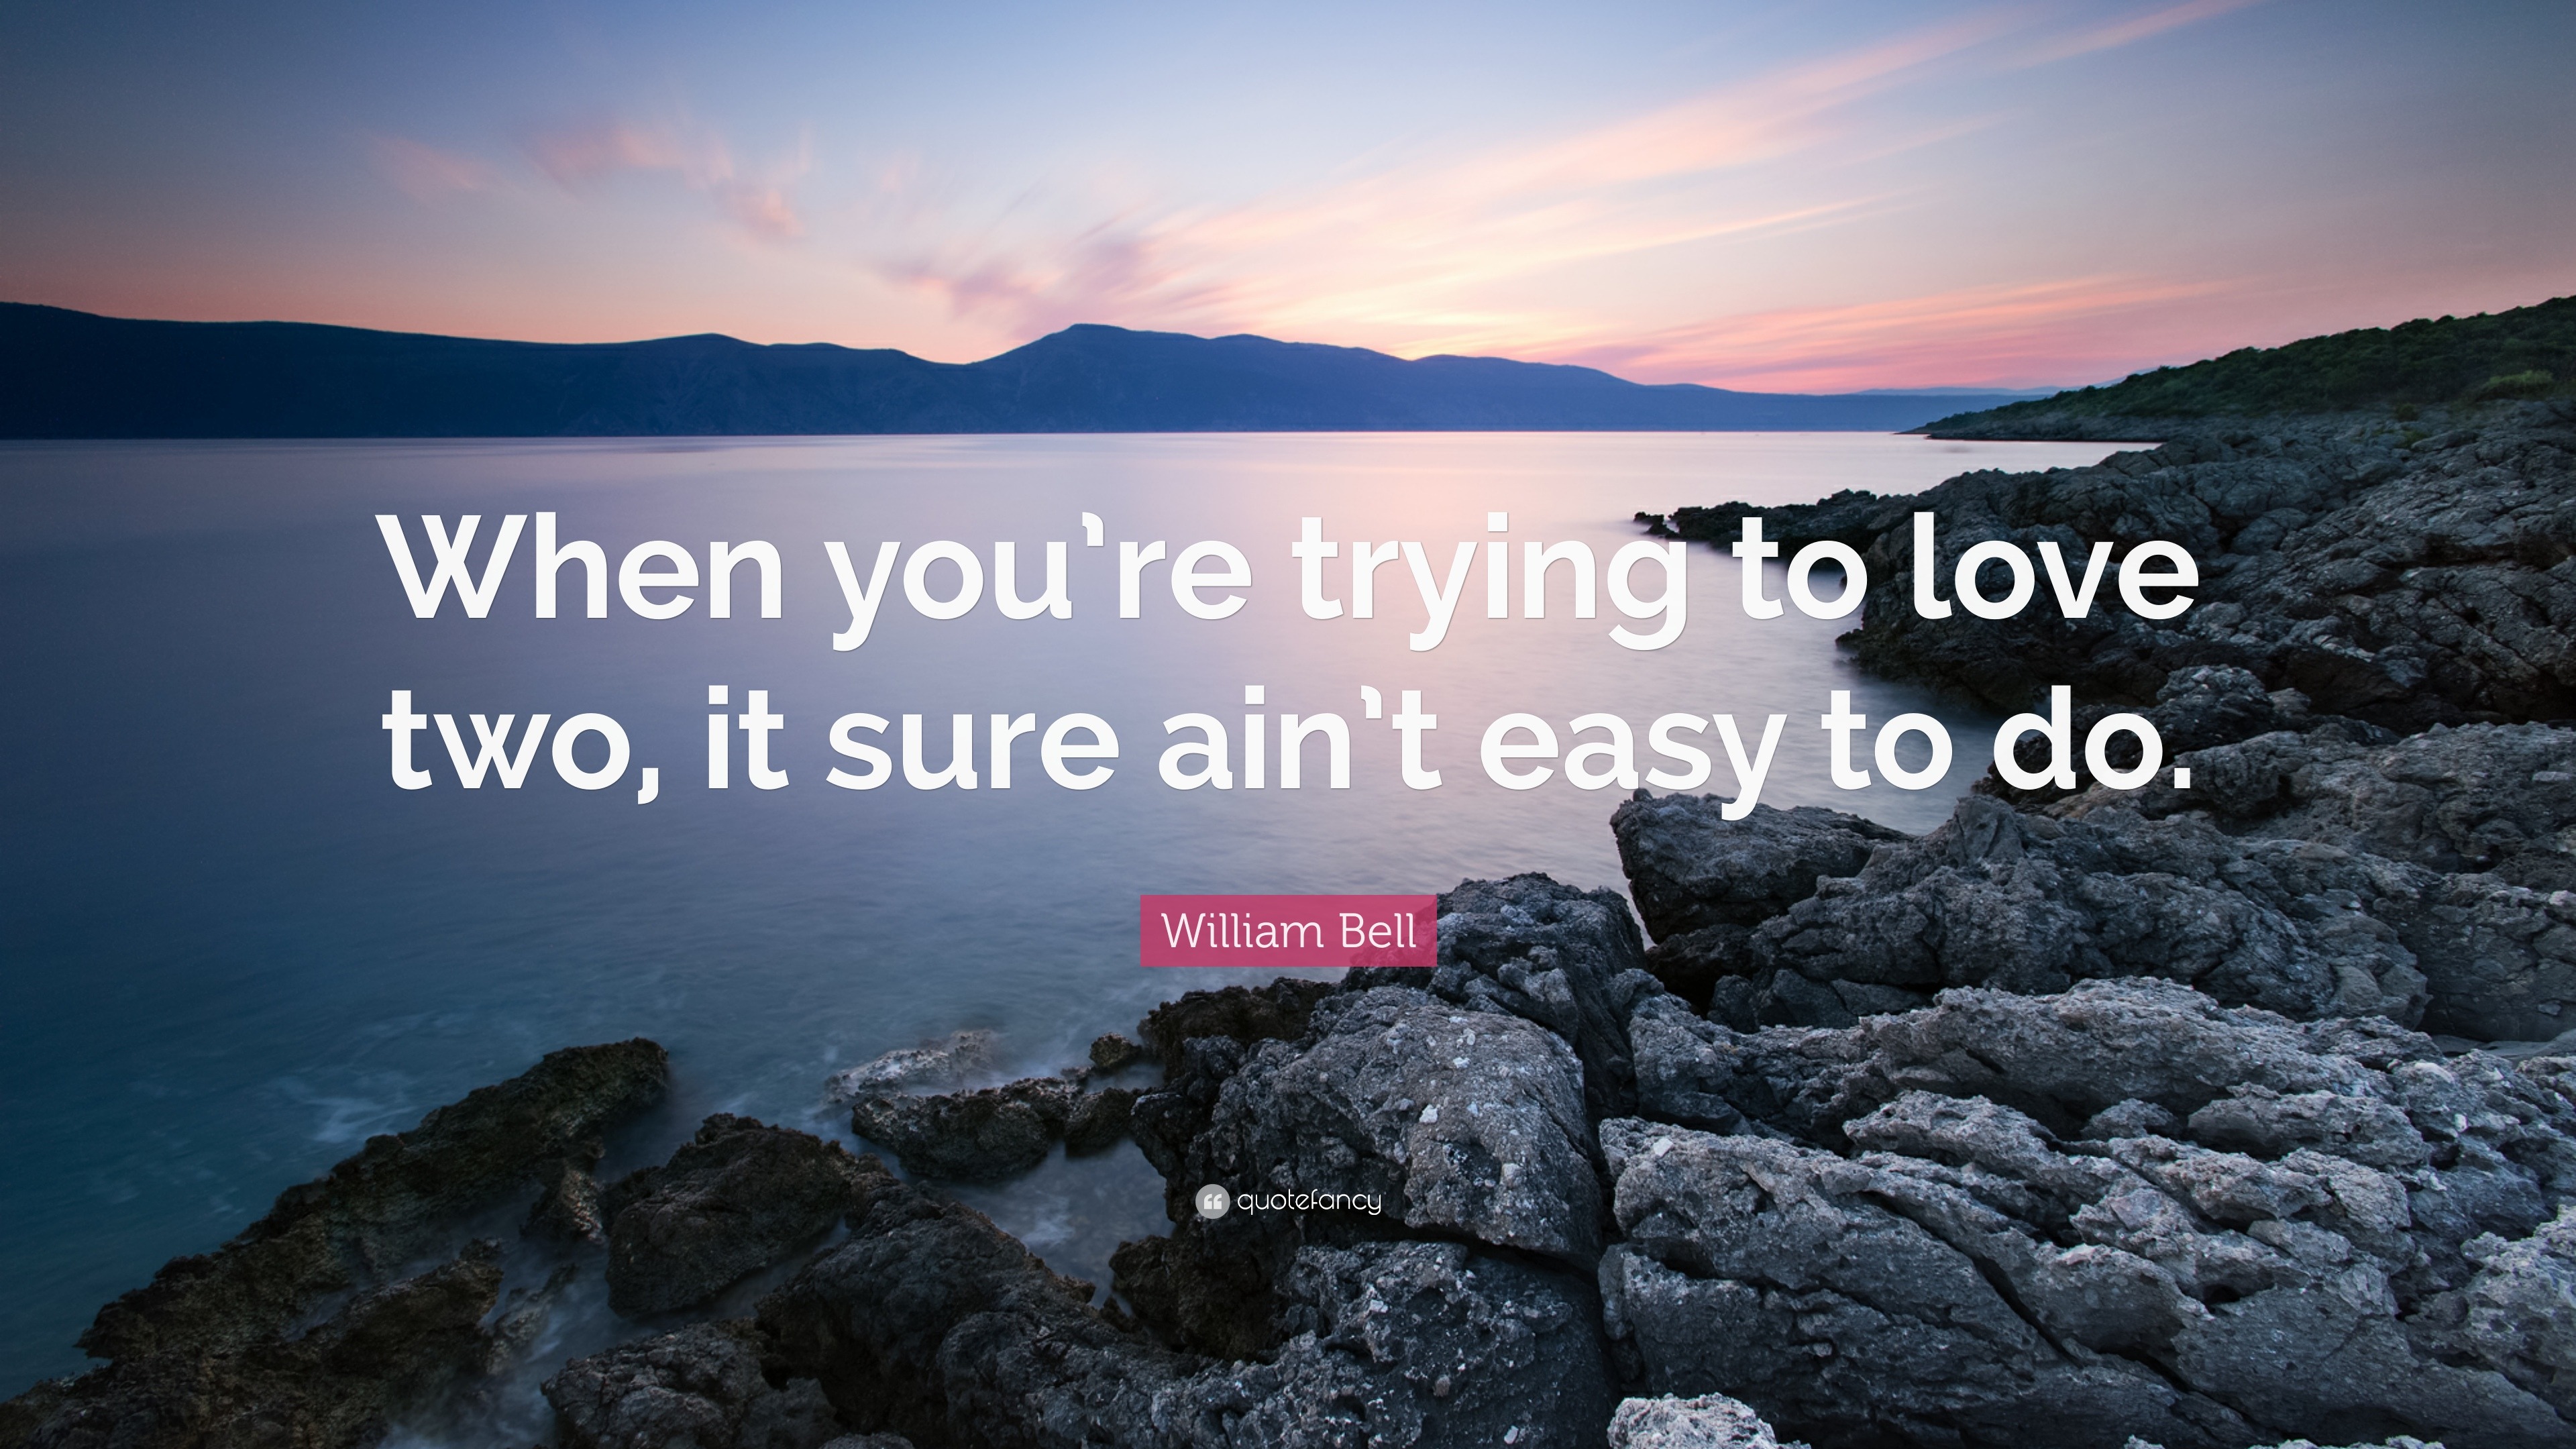 William Bell Quote “When you re trying to love two it sure